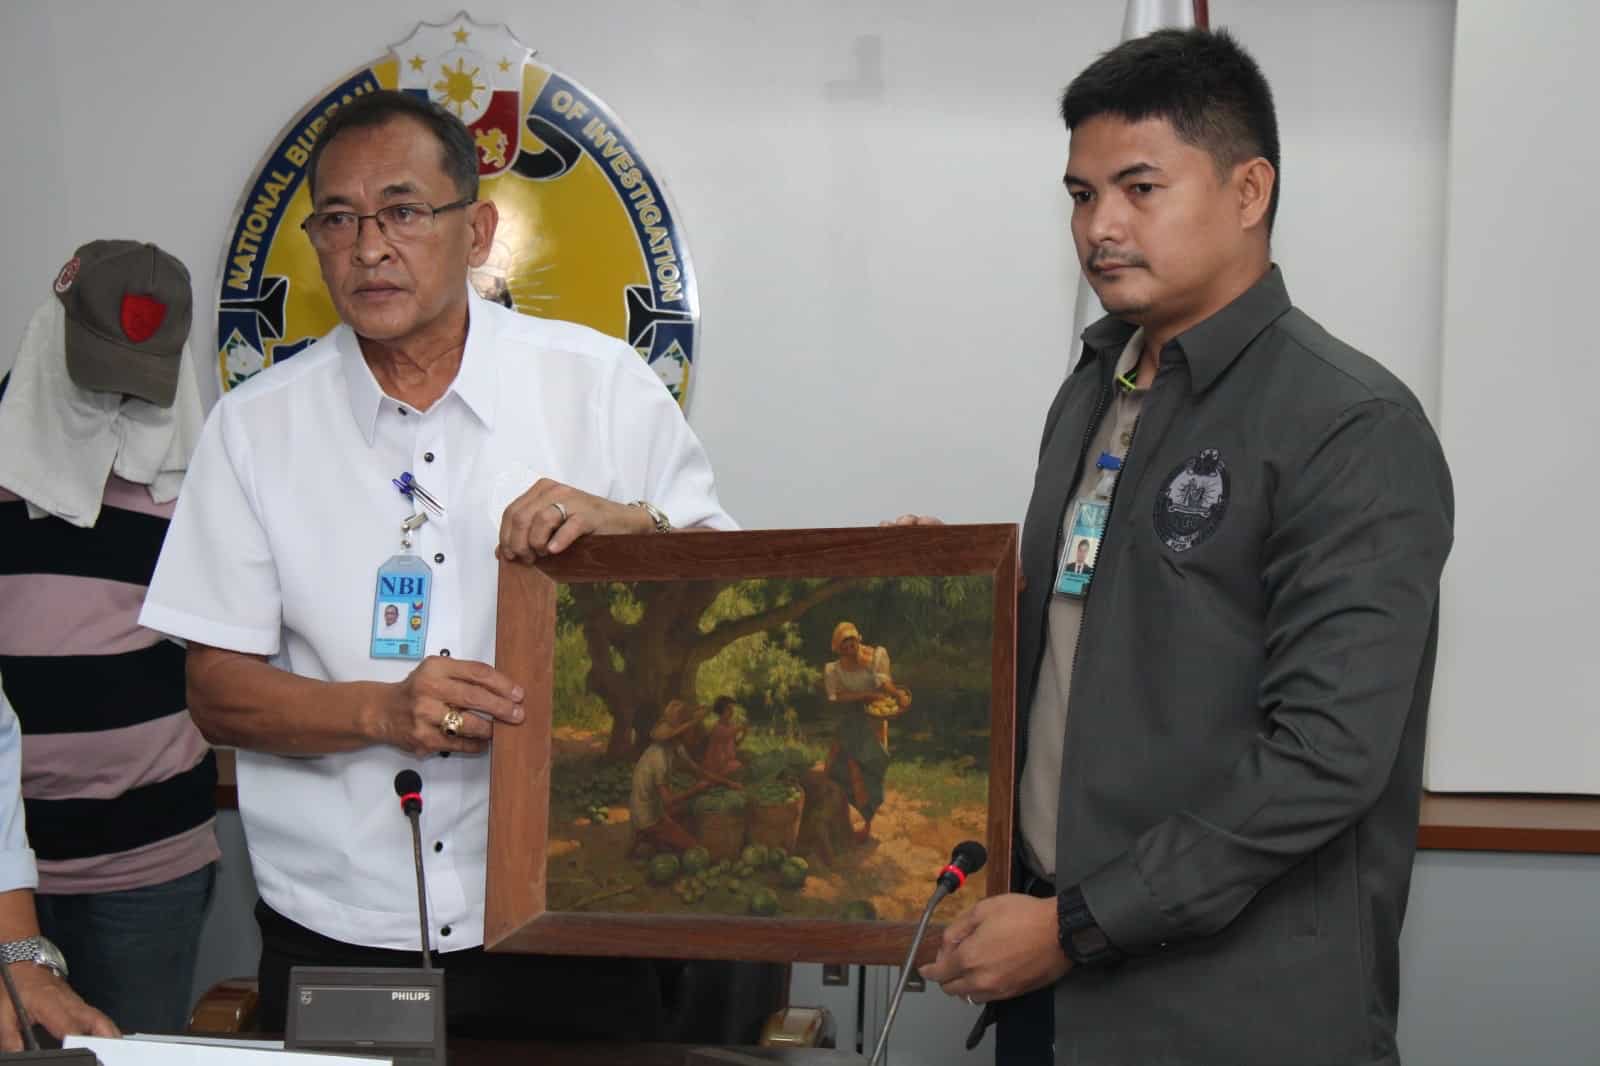 Amorsolo painting recovered, says NBI